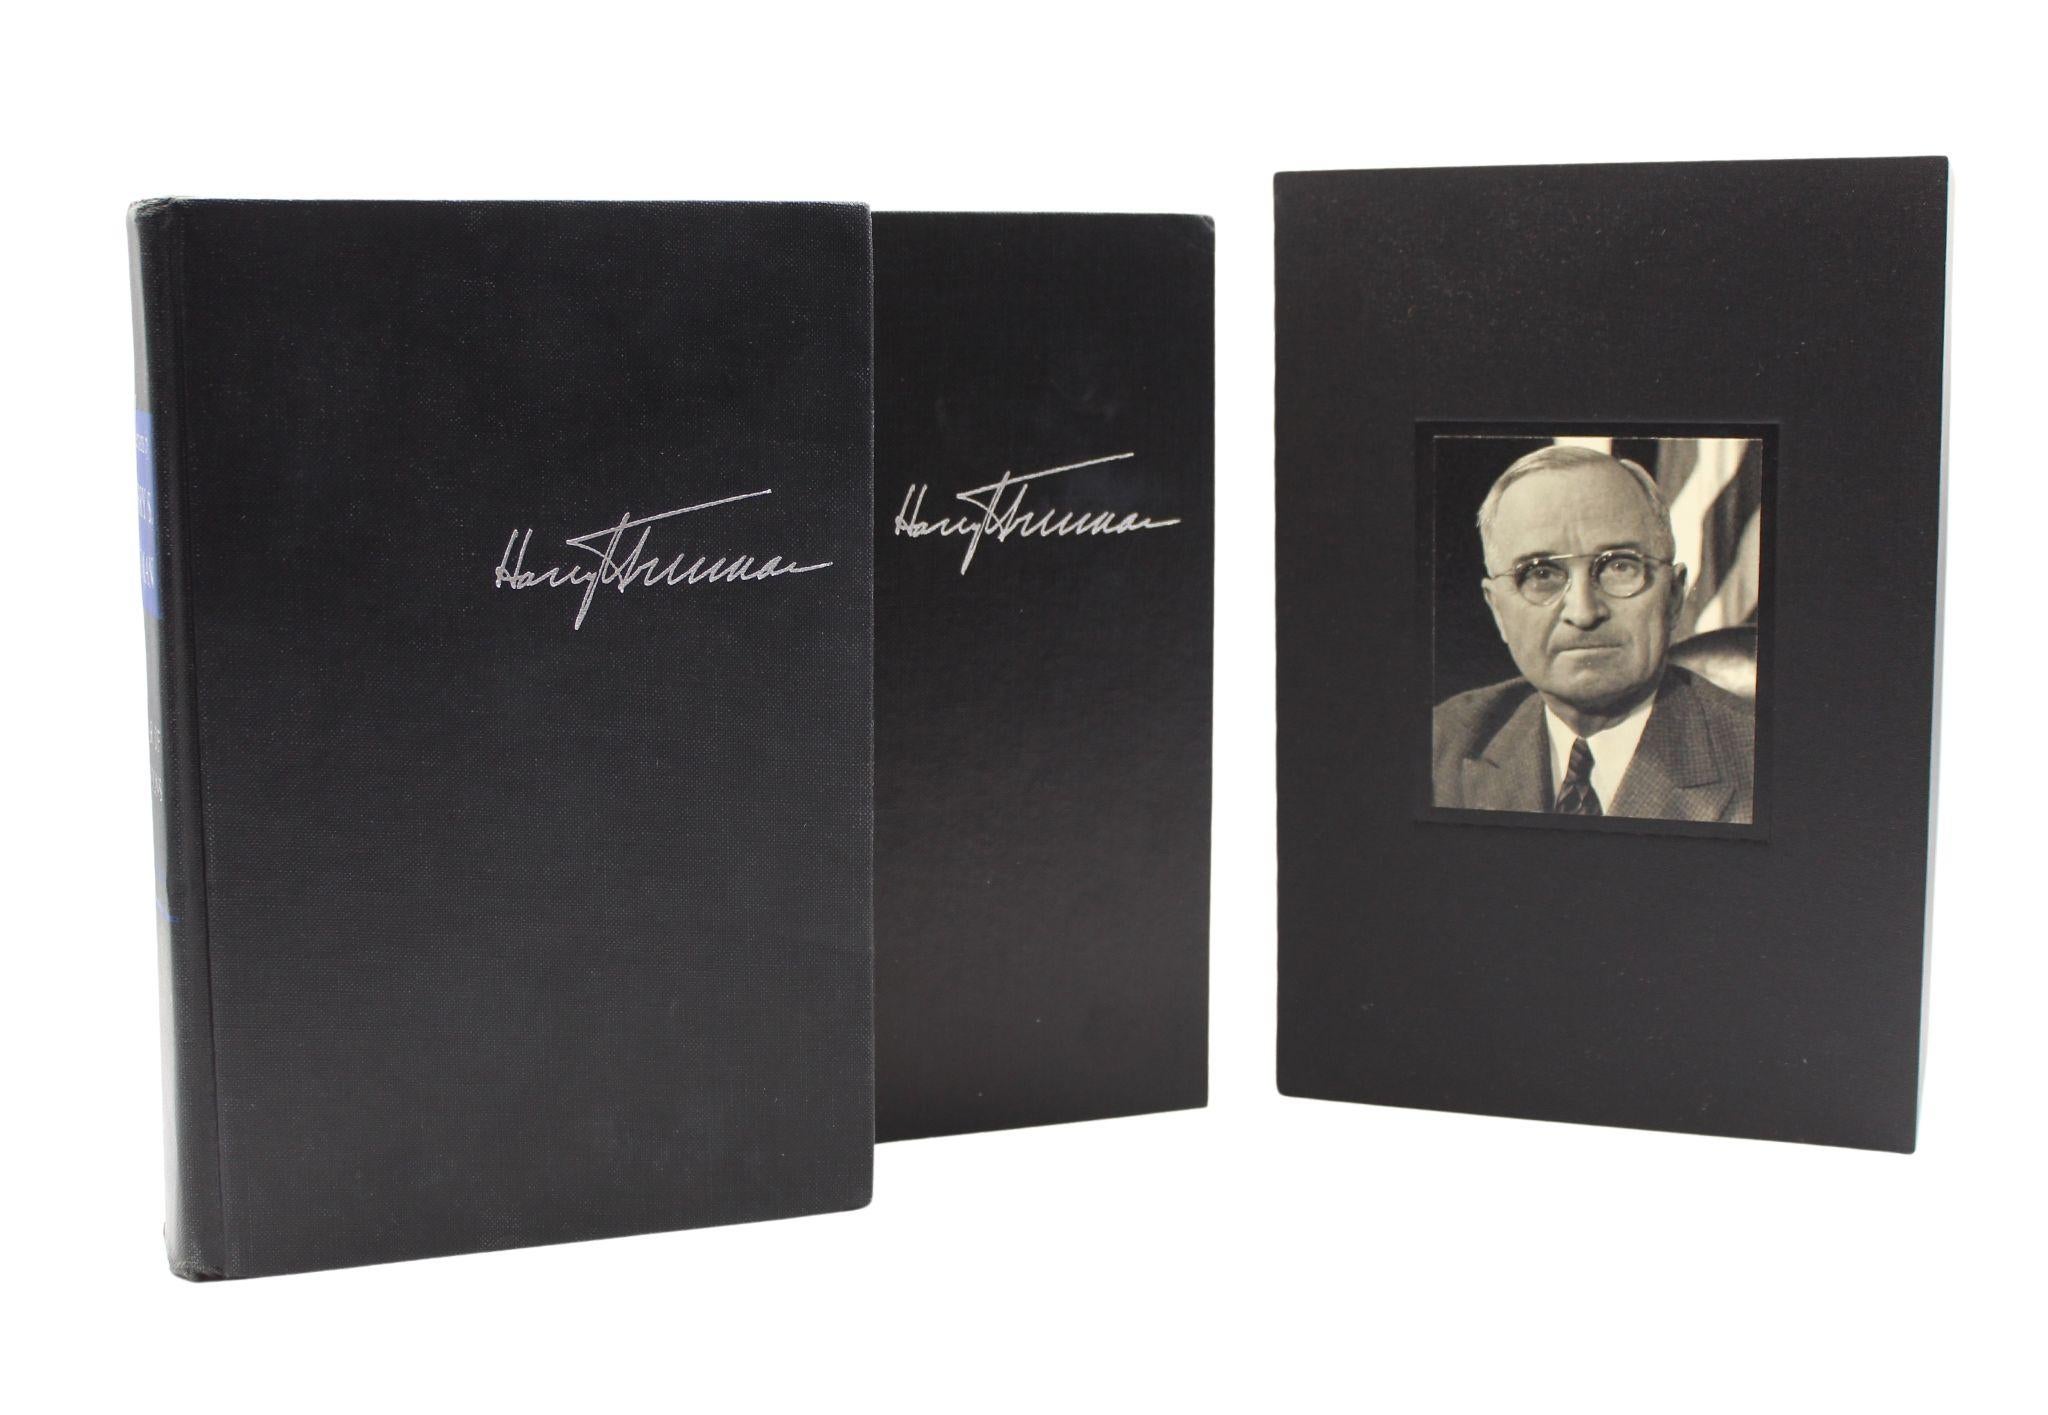 Truman, Harry. Memoirs by Harry S. Truman: Year of Decisions [and] Years of Trial and Hope. New York: Doubleday & Company, 1955-1956. Special Kansas City Limited Edition. Two Volumes. Signed and dated by Truman. In publisher's original silver